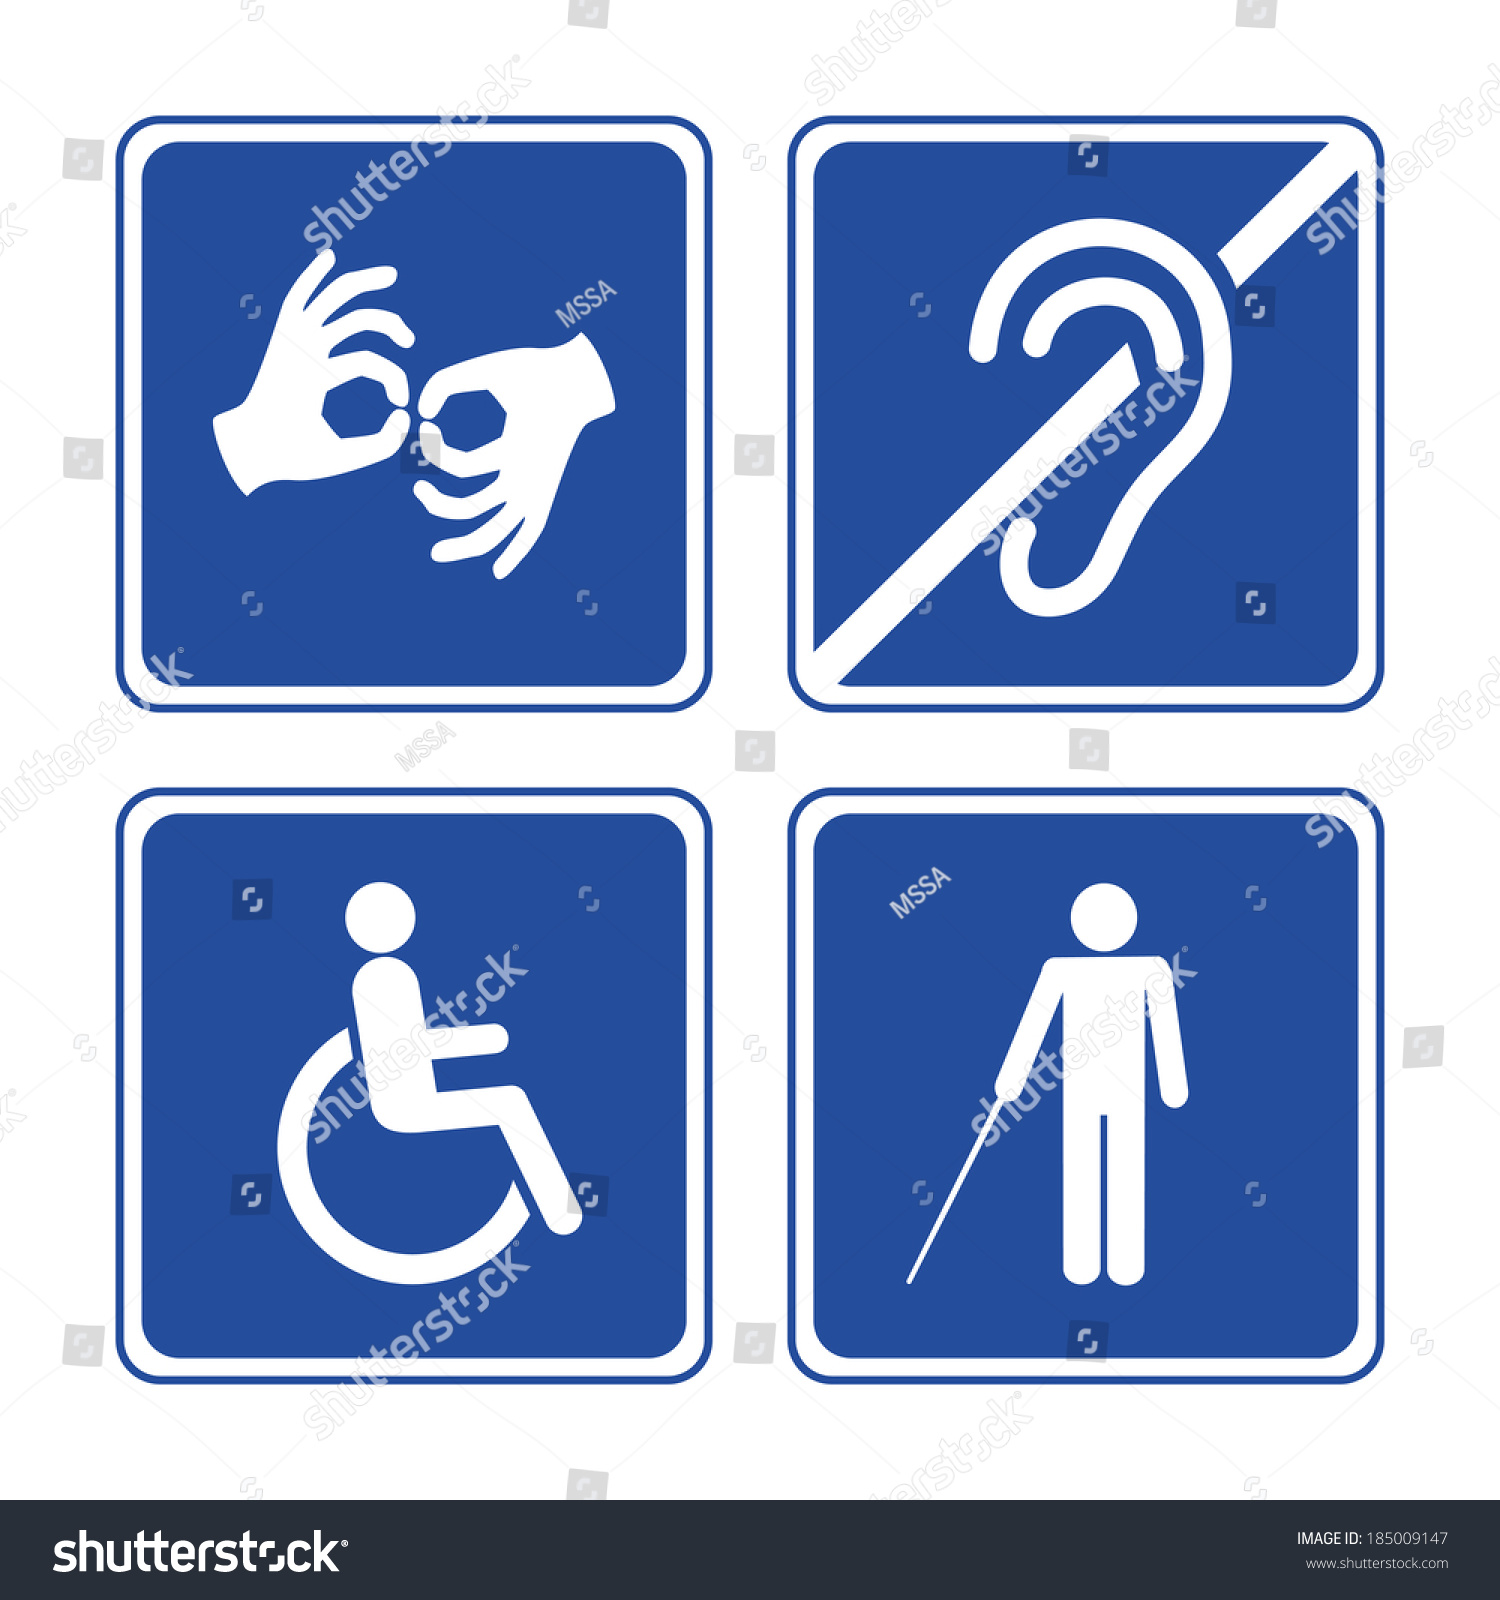 California Disabled Accessibility Guidebook Pdf Viewer